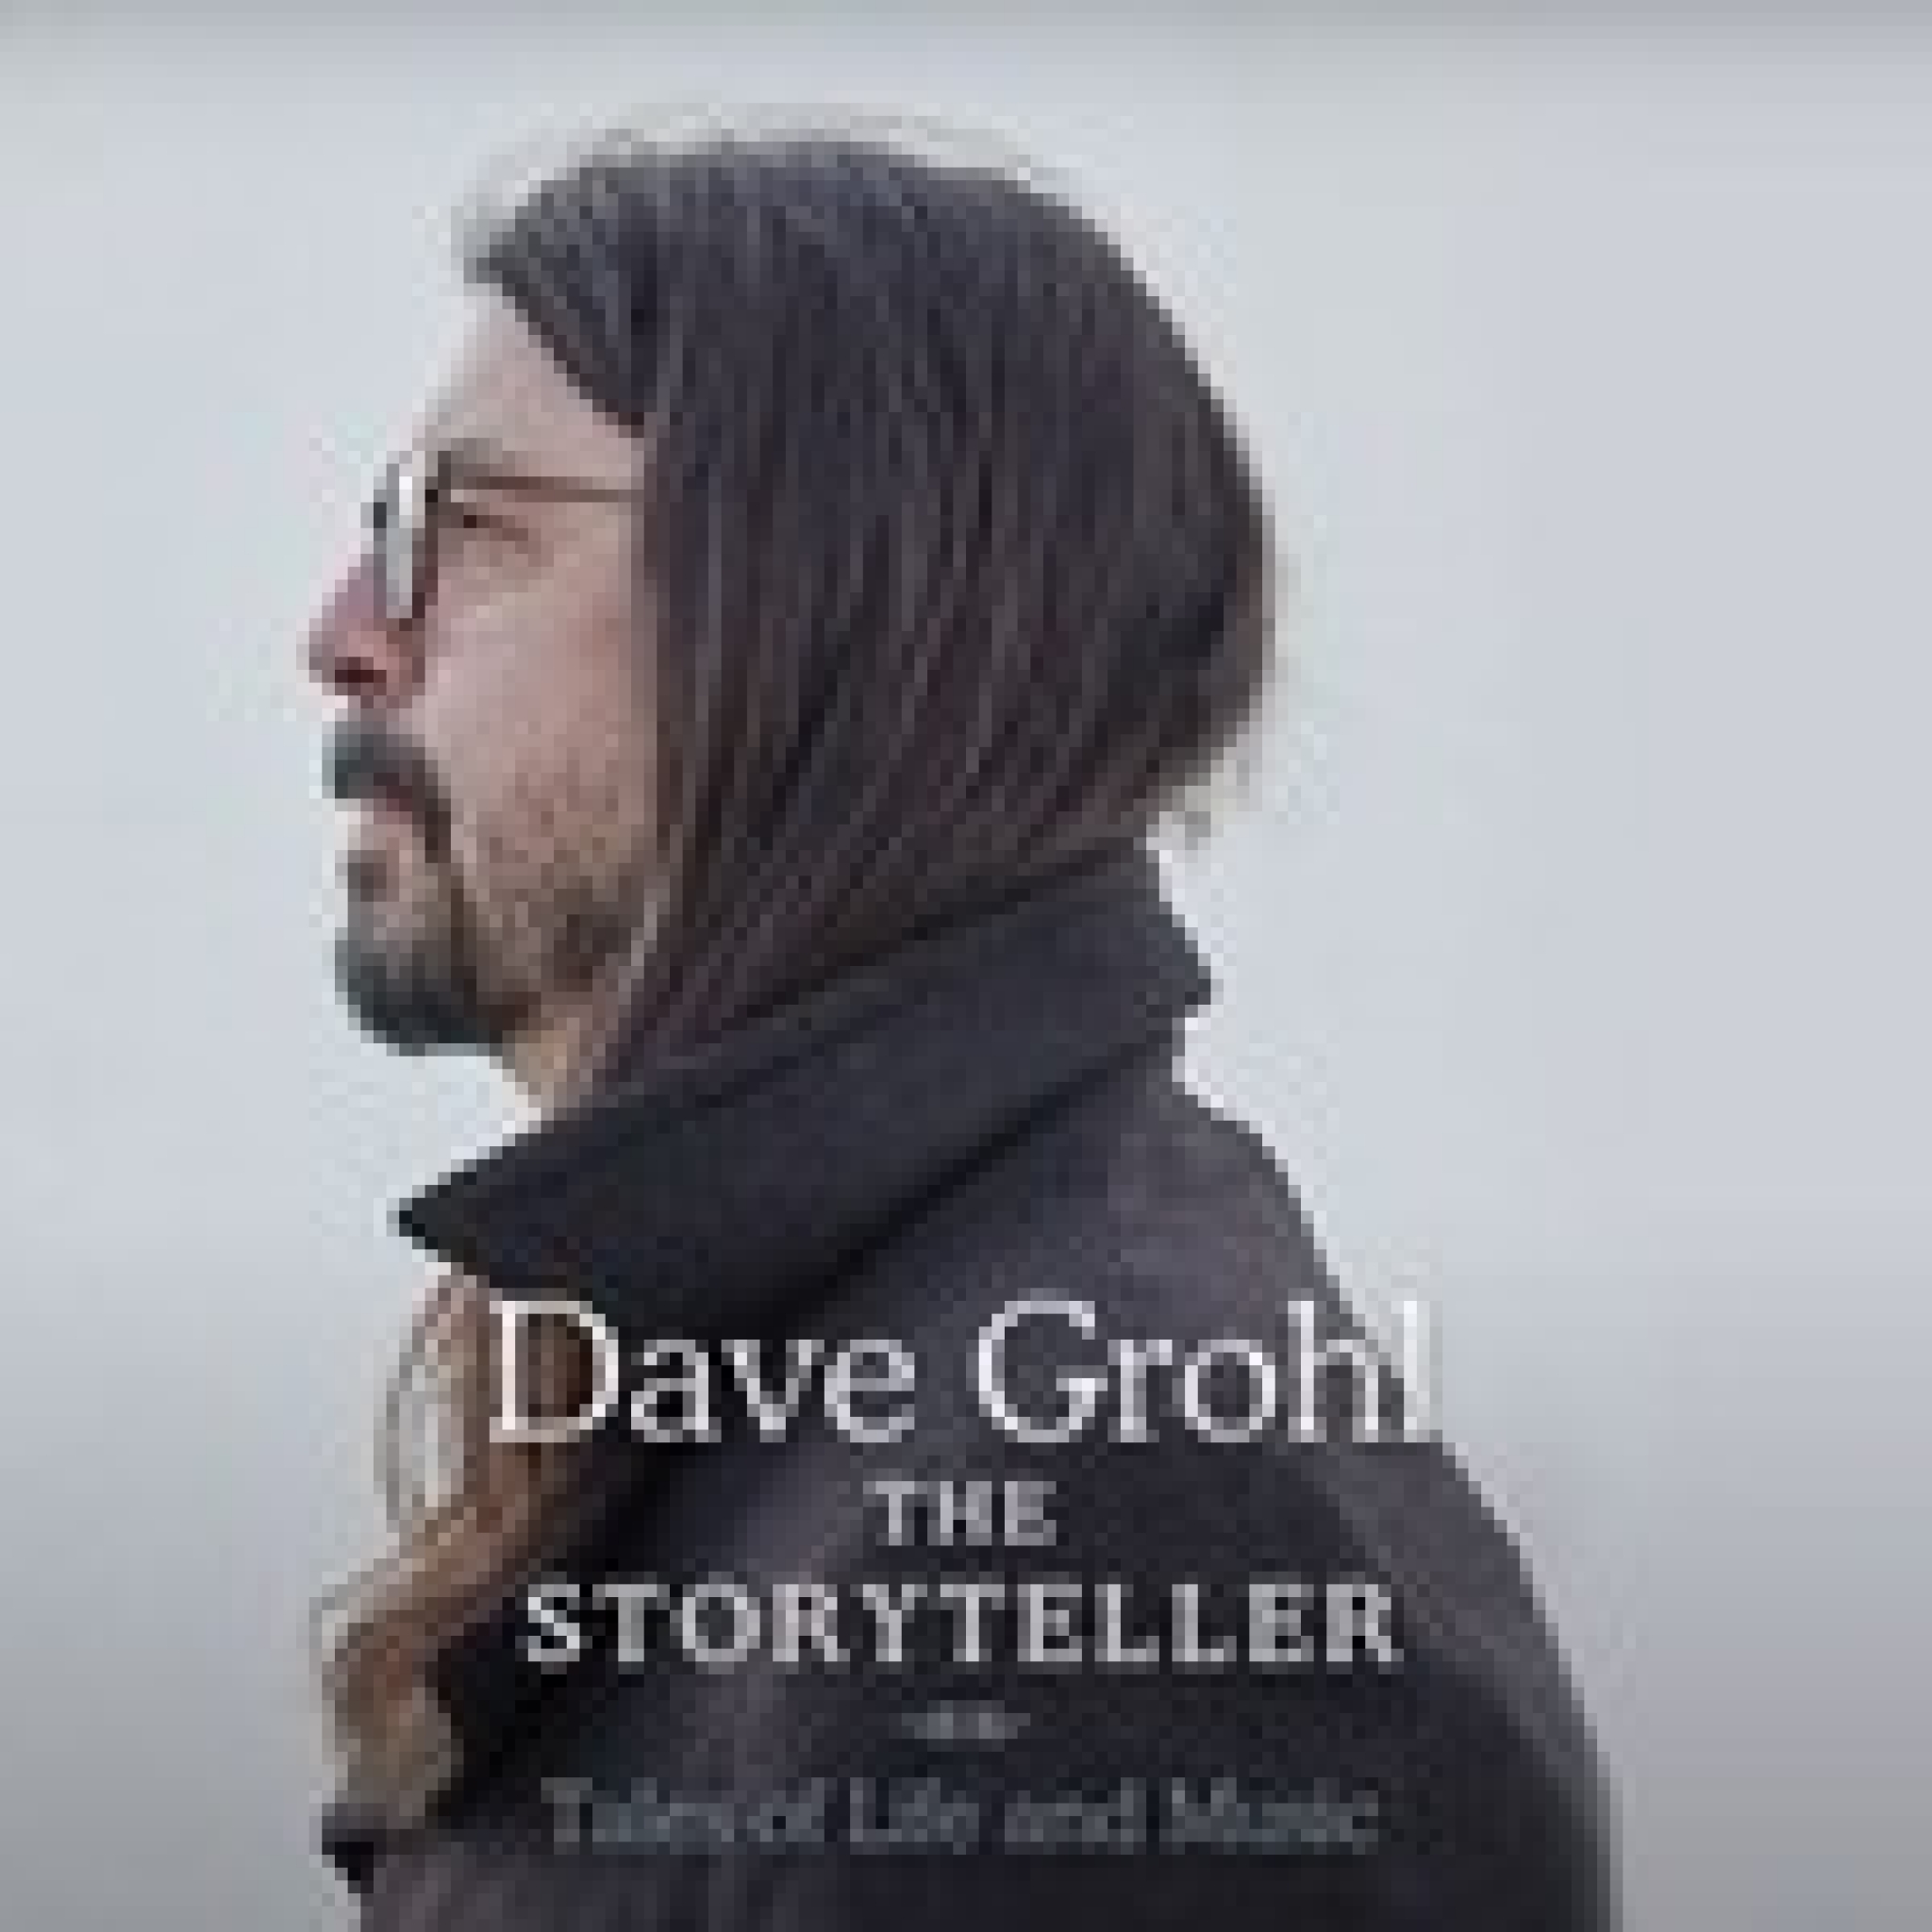 Dave Grohl Will Reflect on Rock N’ Roll Life in ‘The Storyteller’ Memoir